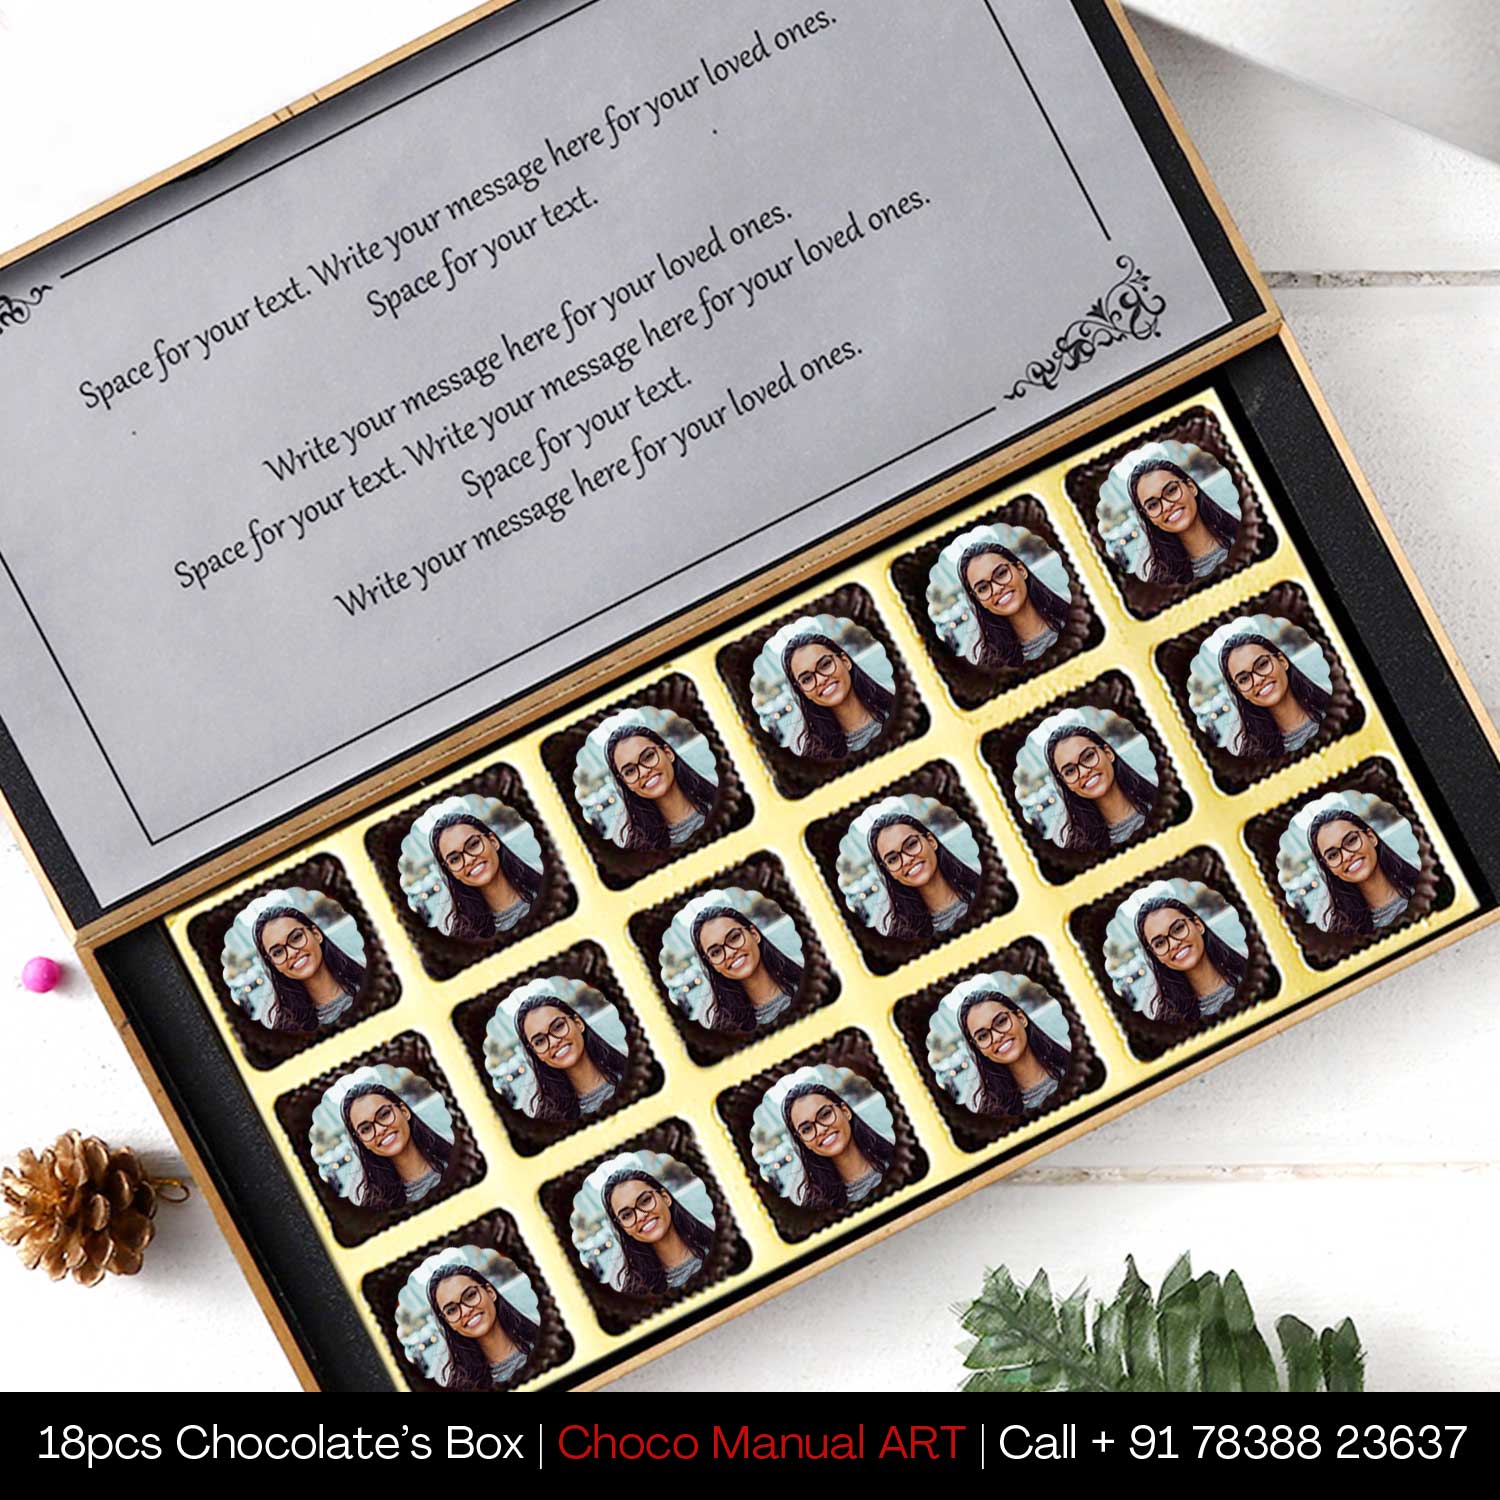  best personalised gifts customized gifts for best friend unique personalized gifts unique personalized gifts for him personalized gift ideas for her unique personalised gifts india customized gifts for couples customized gifts amazon